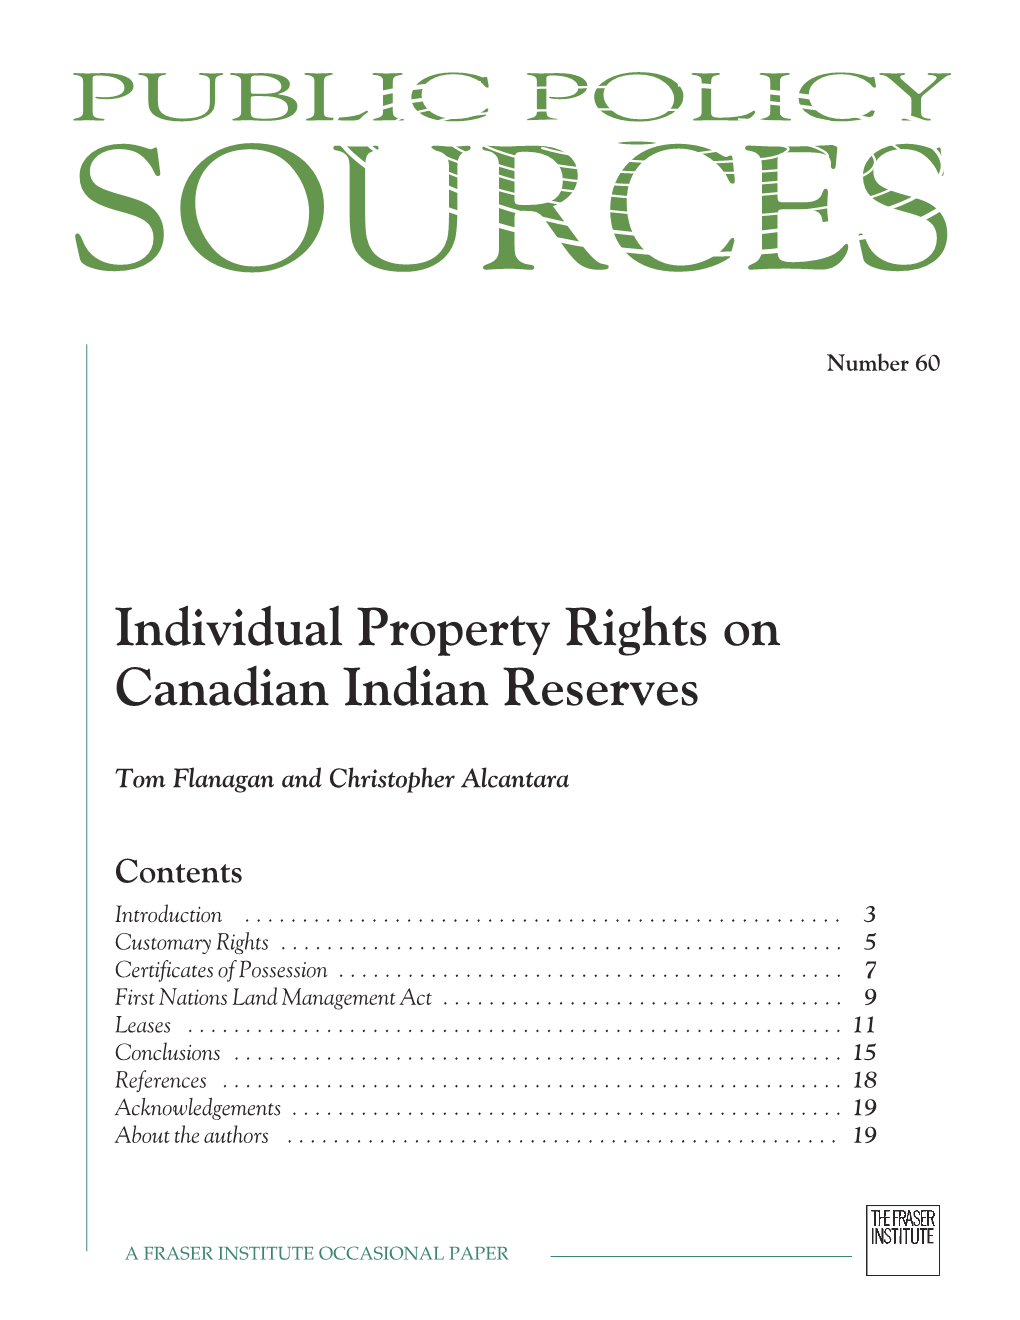 Individual Property Rights on Canadian Indian Reserves